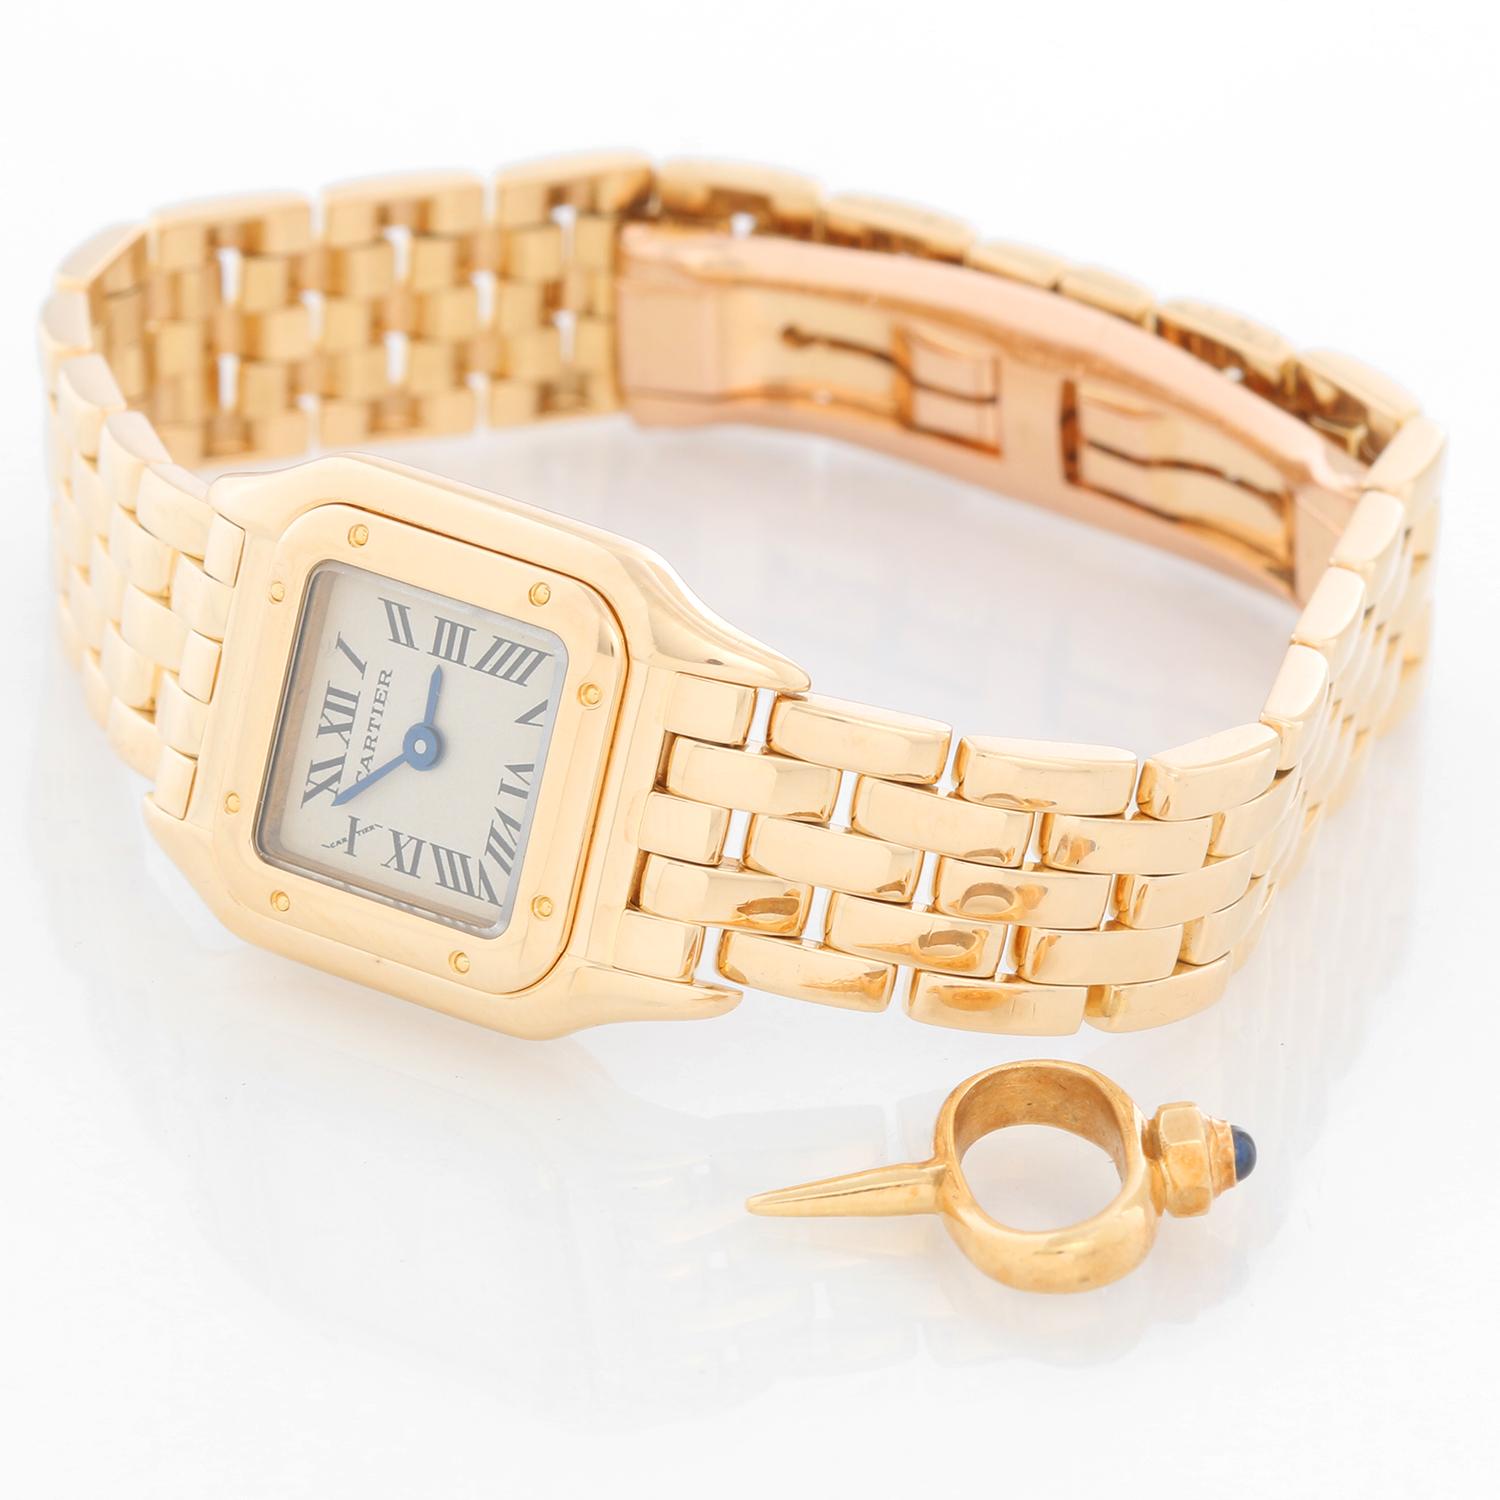 Cartier Panther Ladies 18k Yellow Gold Panthere Watch W25034B9 1130 Mini - Quartz. 18k yellow gold case (17mm x 23mm). Silver colored dial with black Roman numerals. 18k yellow gold Panther bracelet; will fit up to a 5 1/4 inch wrist . Pre-owned